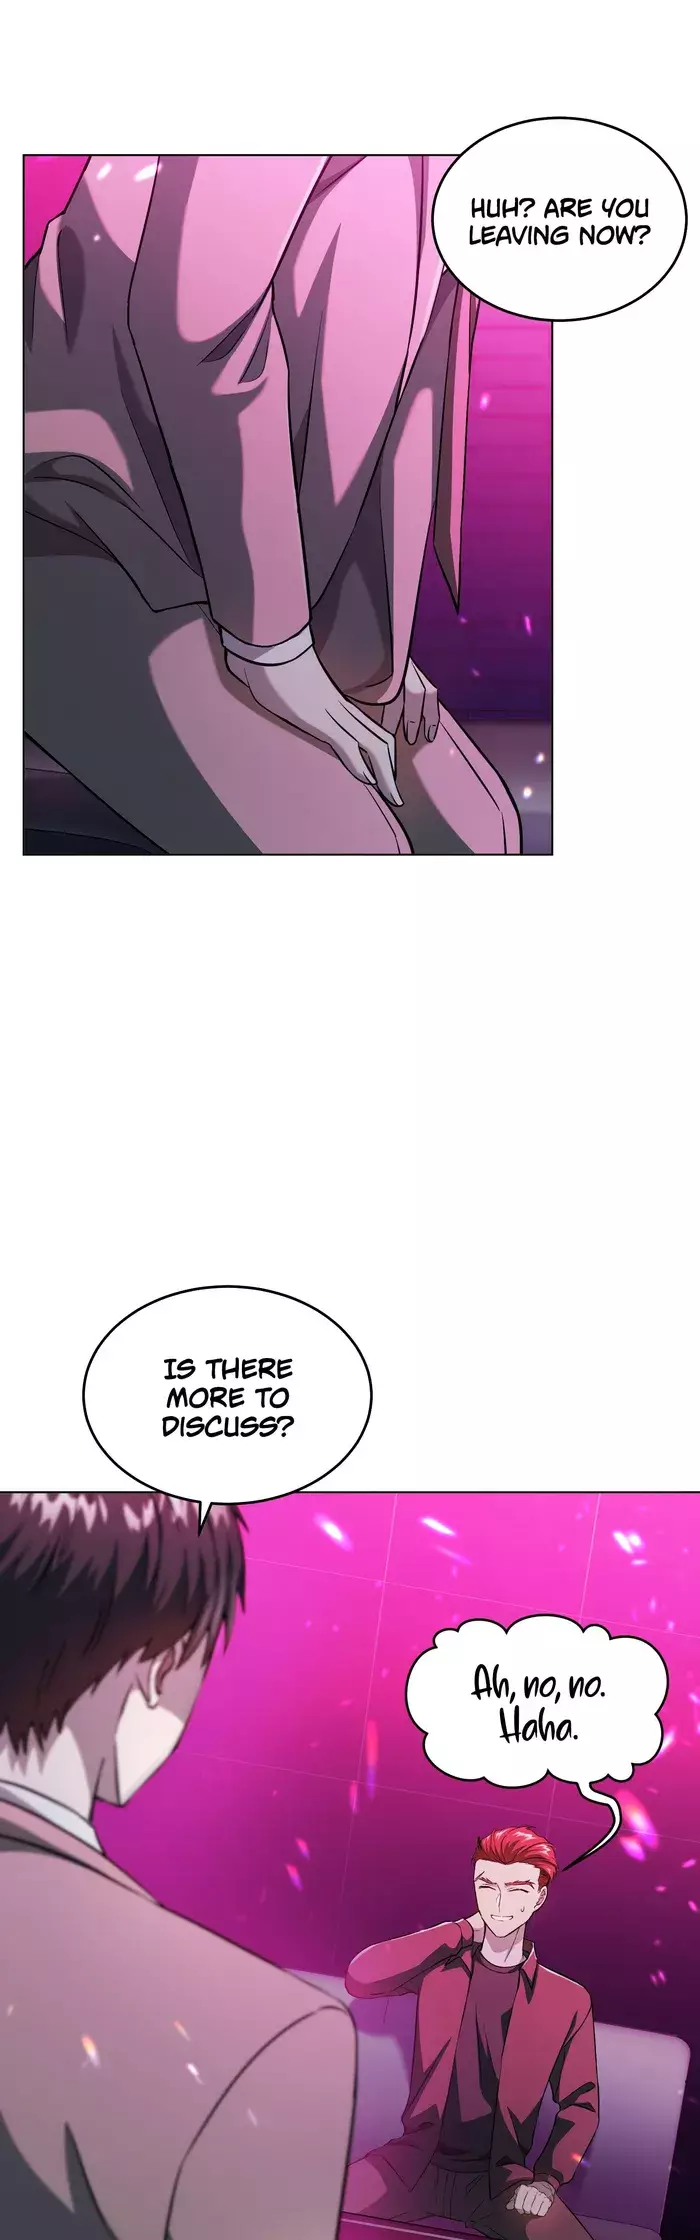 The Iron-Blooded Necromancer Has Returned - 9 page 2-a010e84d